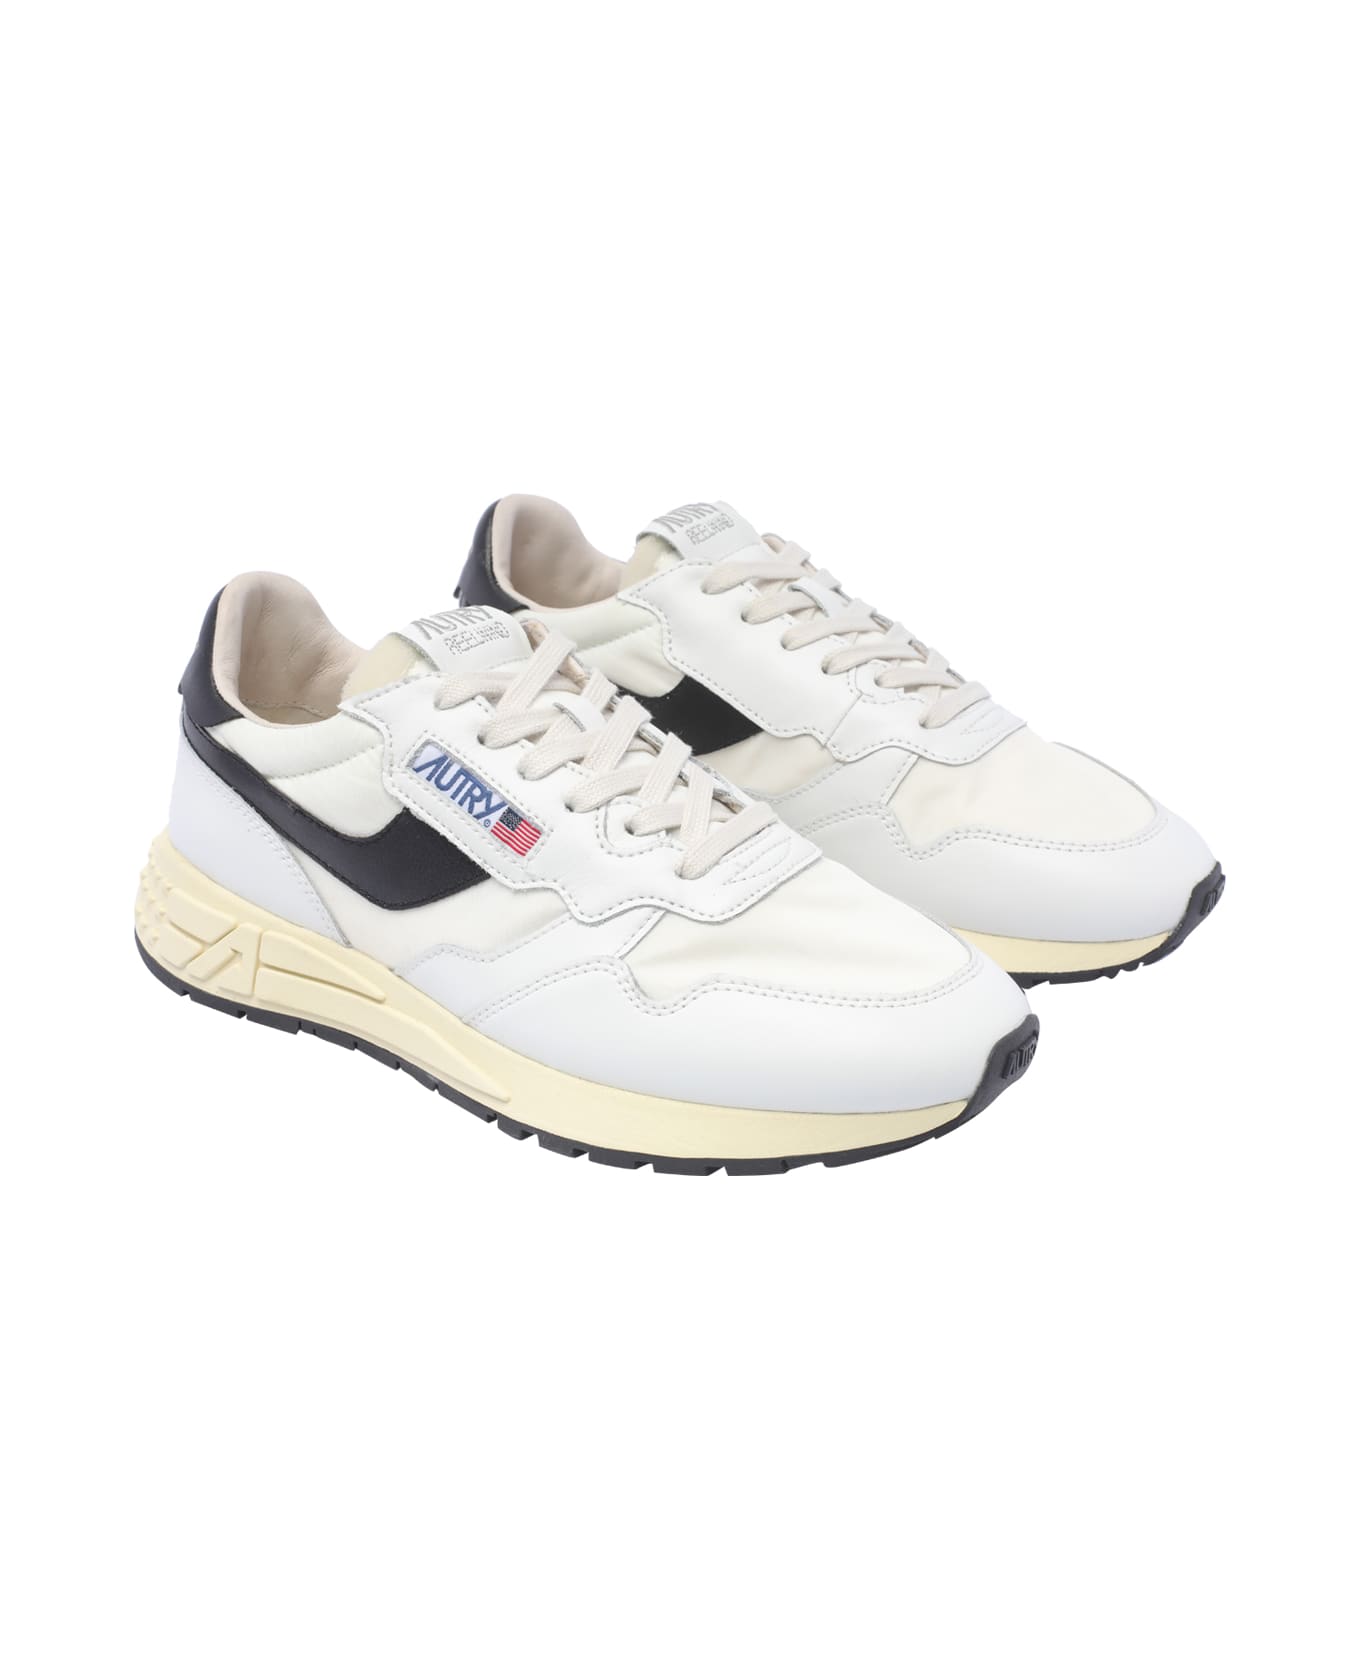 Autry Reelwind Sneakers - White/black スニーカー